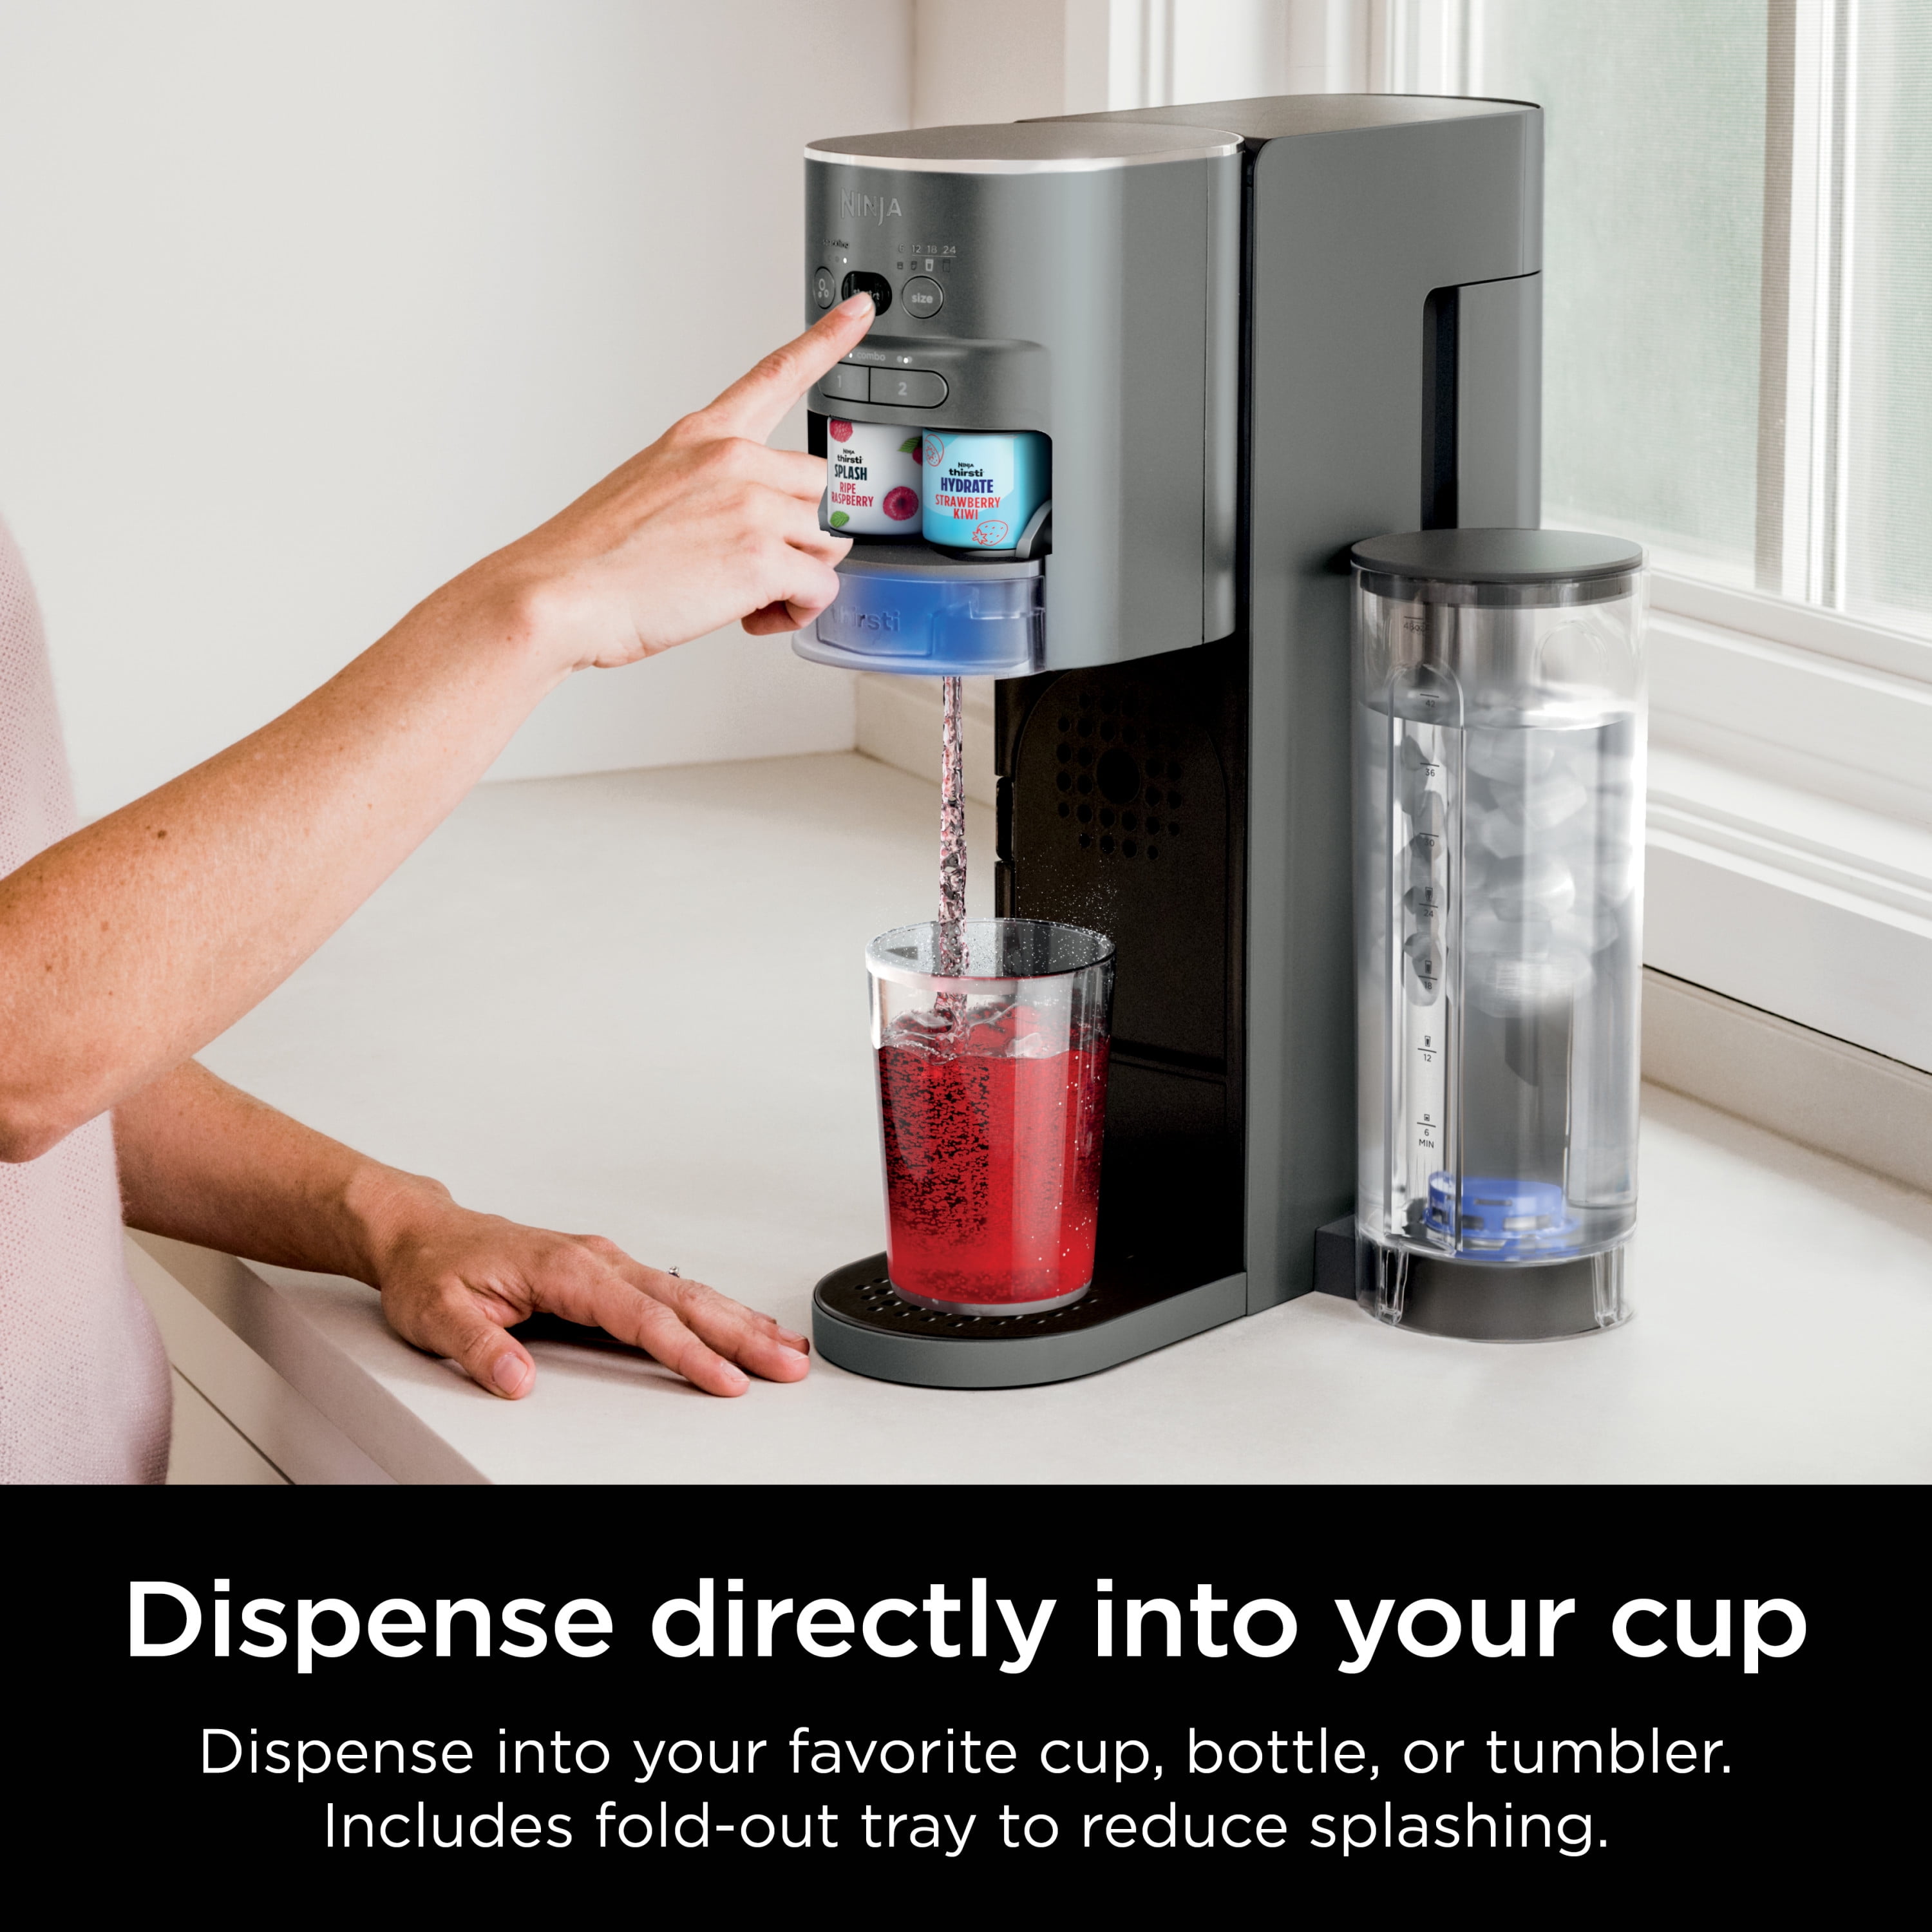  Ninja Thirsti Drink System, Soda Maker, Create Unique Sparkling  & Still Drinks, Personalize Size & Flavor, Carbonated Water Machine, 60L  CO2 Cylinder & Variety of Flavored Water Drops, Black WC1001: Home